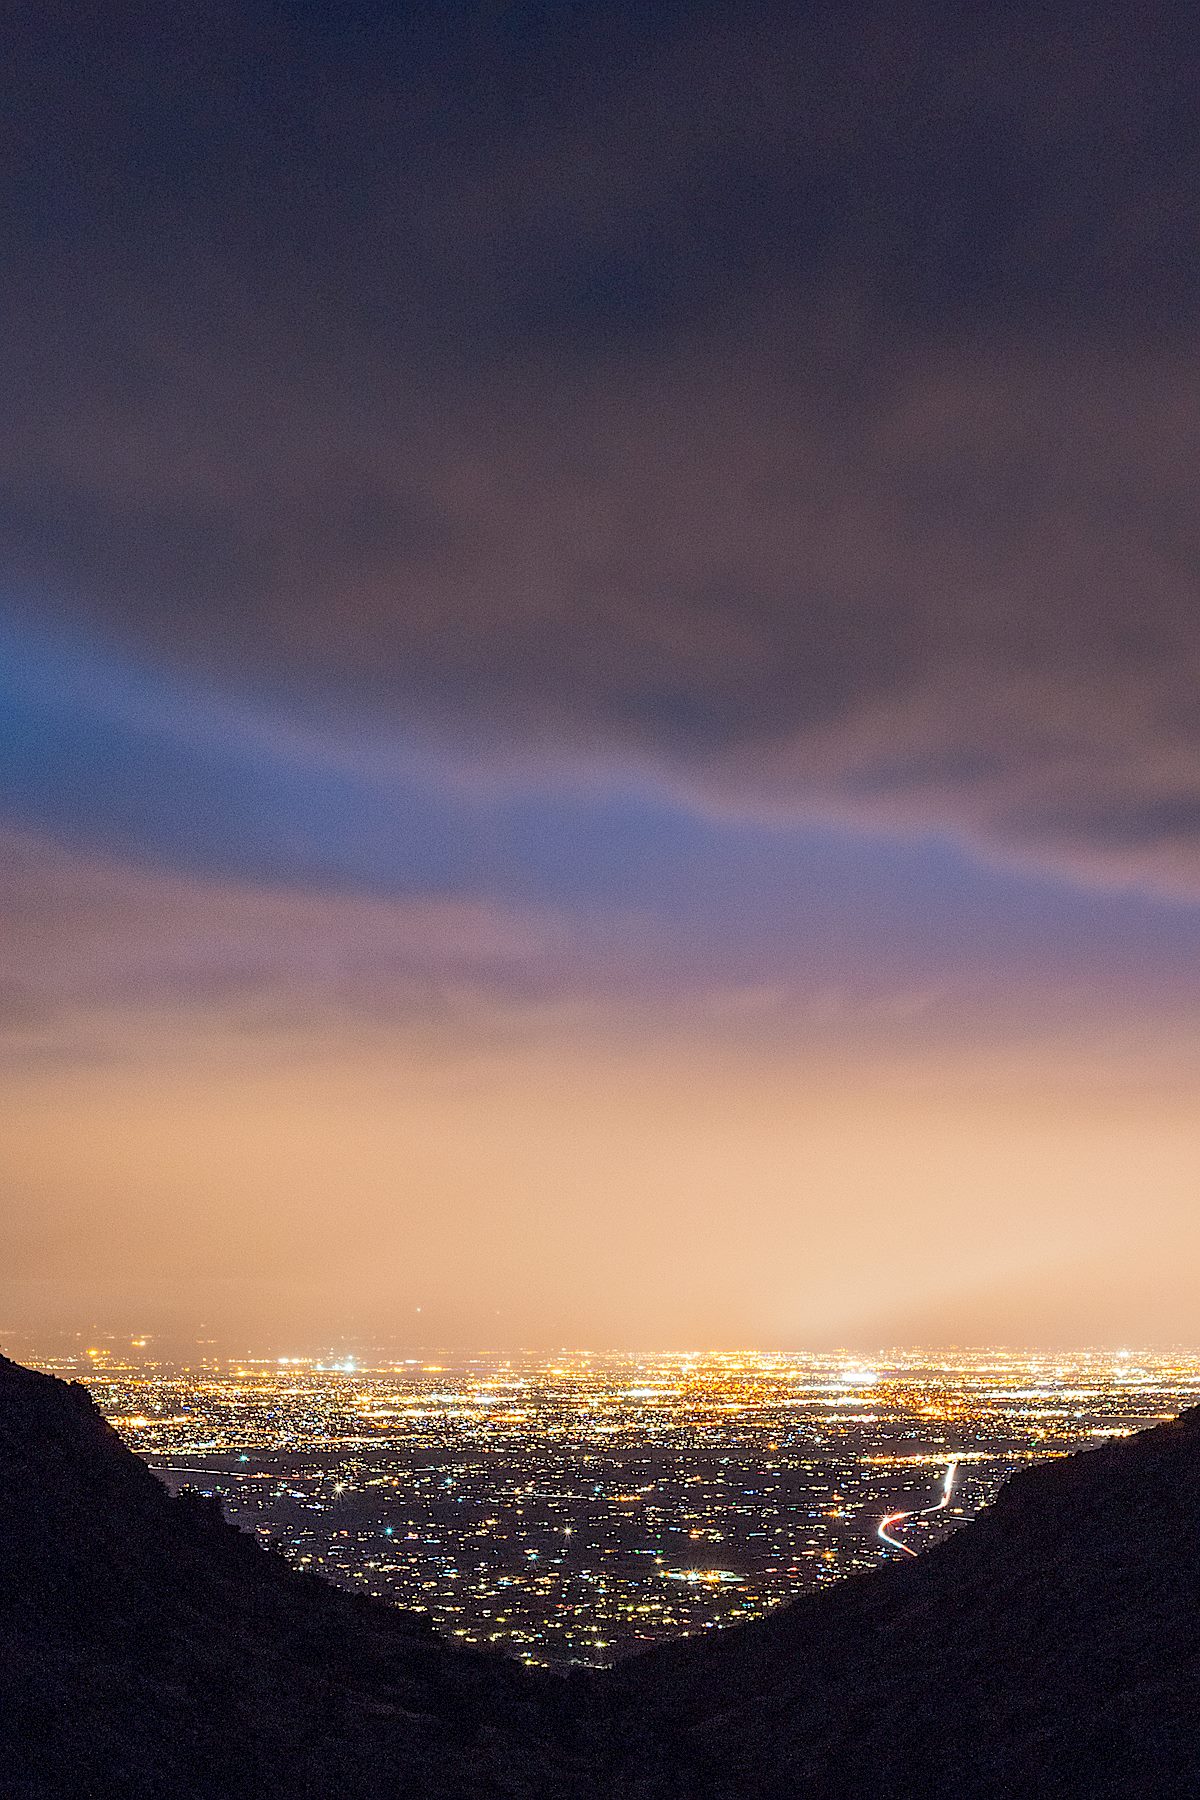 City lights and clouds from a storm from the Babad Do'ag Trail. December 2014